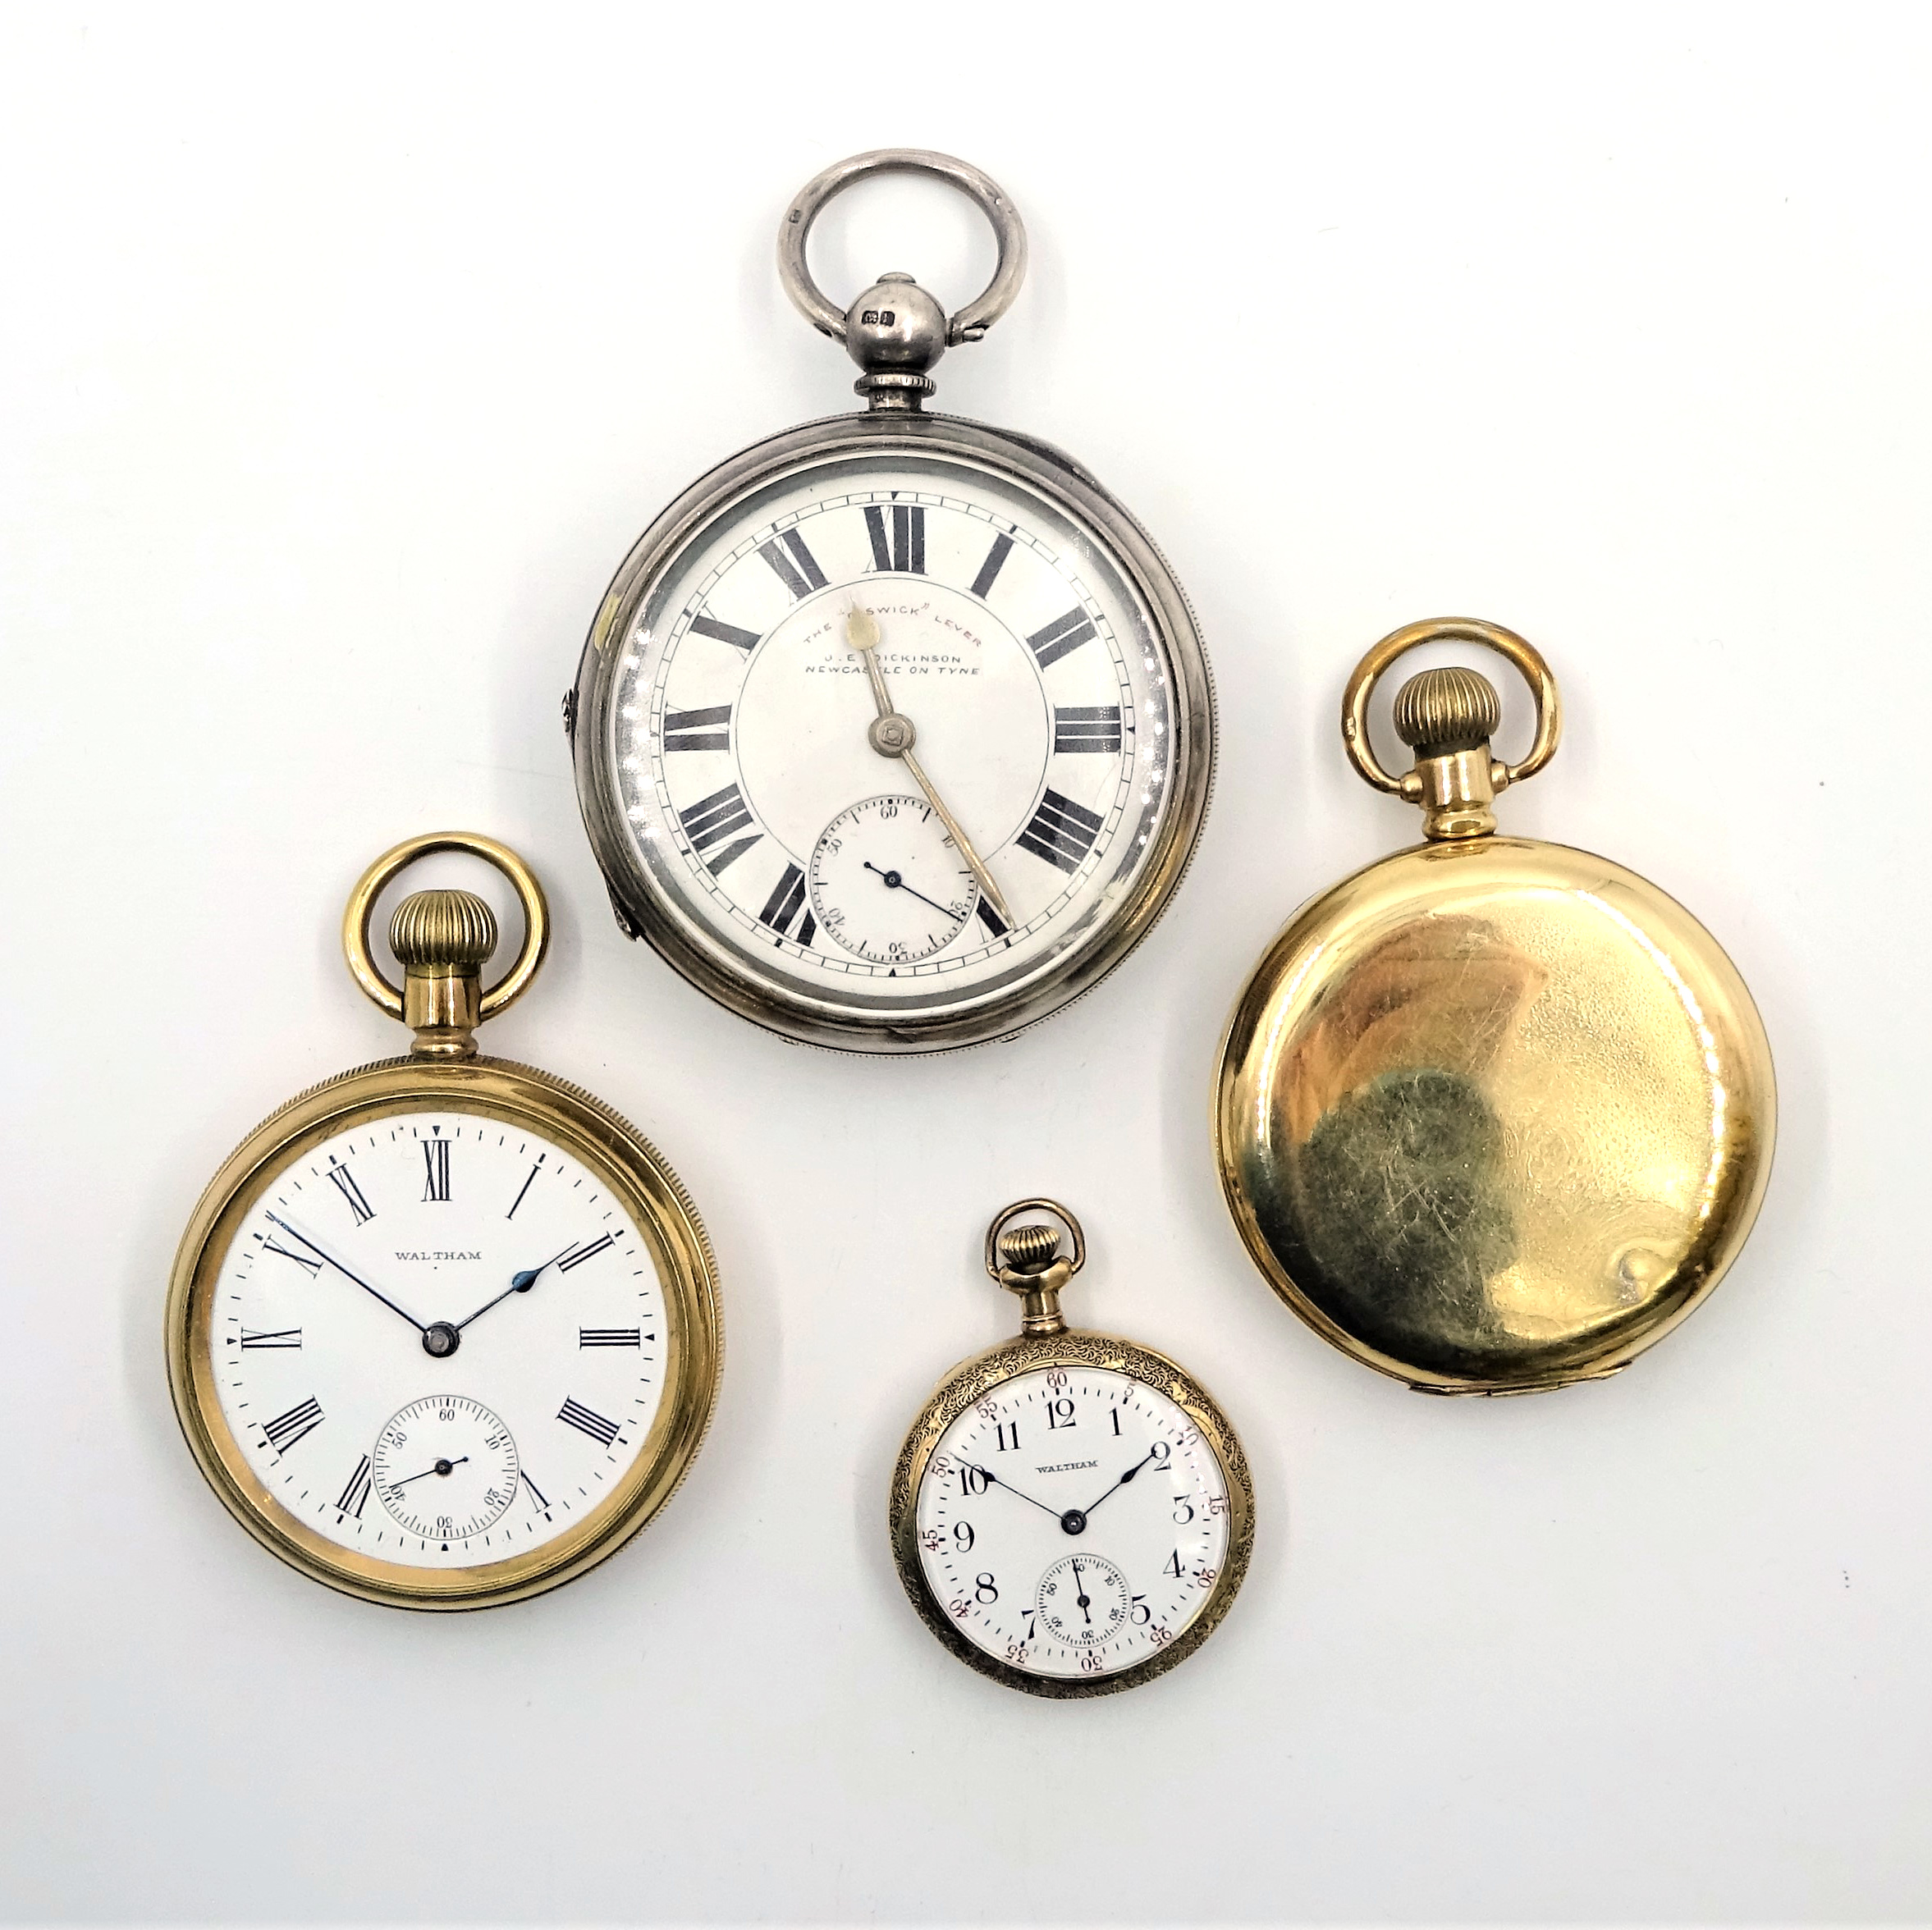 The "Elswick" Lever silver pocket watch by J. E.